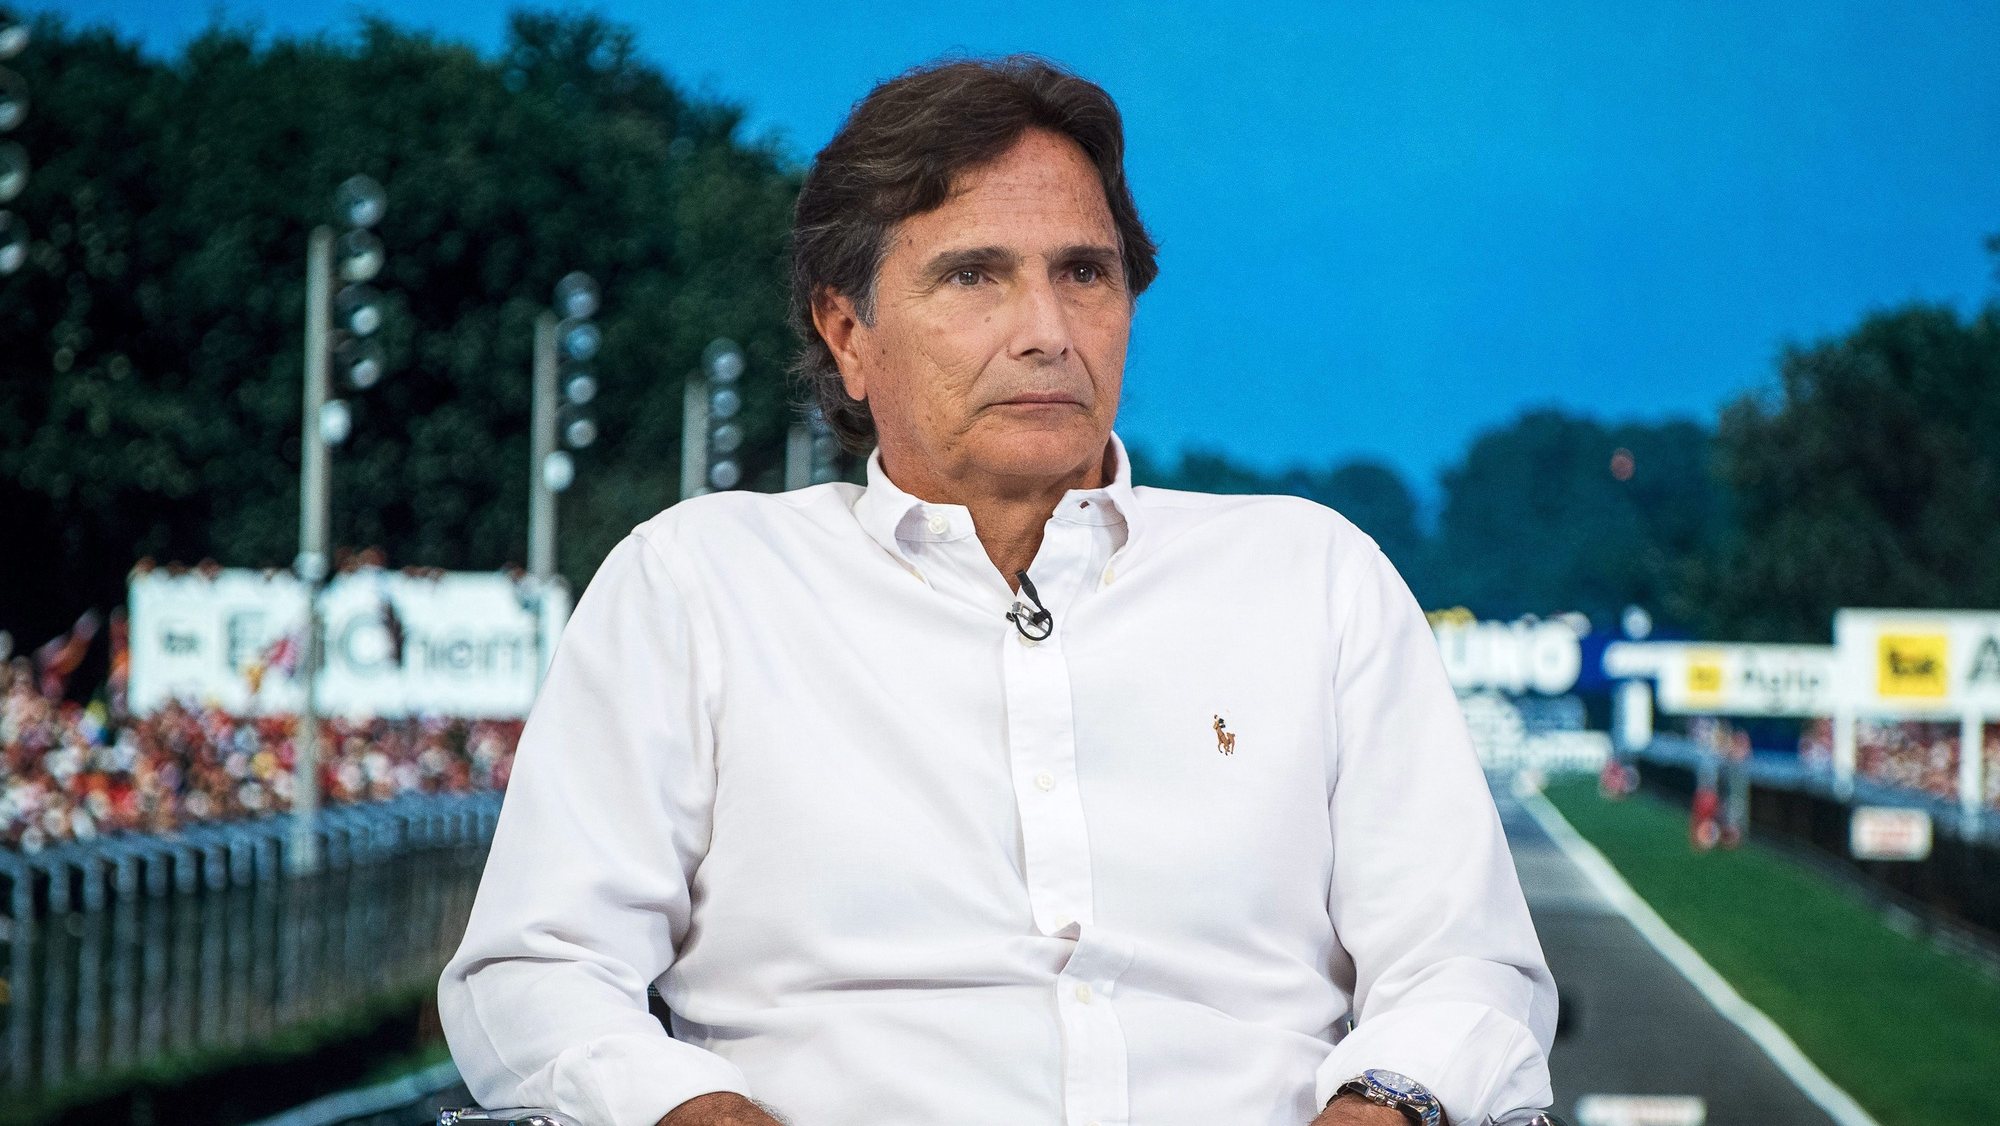 epa04857989 Three-time Formula One world champion Nelson Piquet of Brazil attends the shooting of Hungarian Television’s Formula One magazine in Budapest, Hungary, 23 July 2015. The 2015 Formula One Grand Prix of Hungary will take place on 27 July 2015.  EPA/JANOS MARJAI HUNGARY OUT